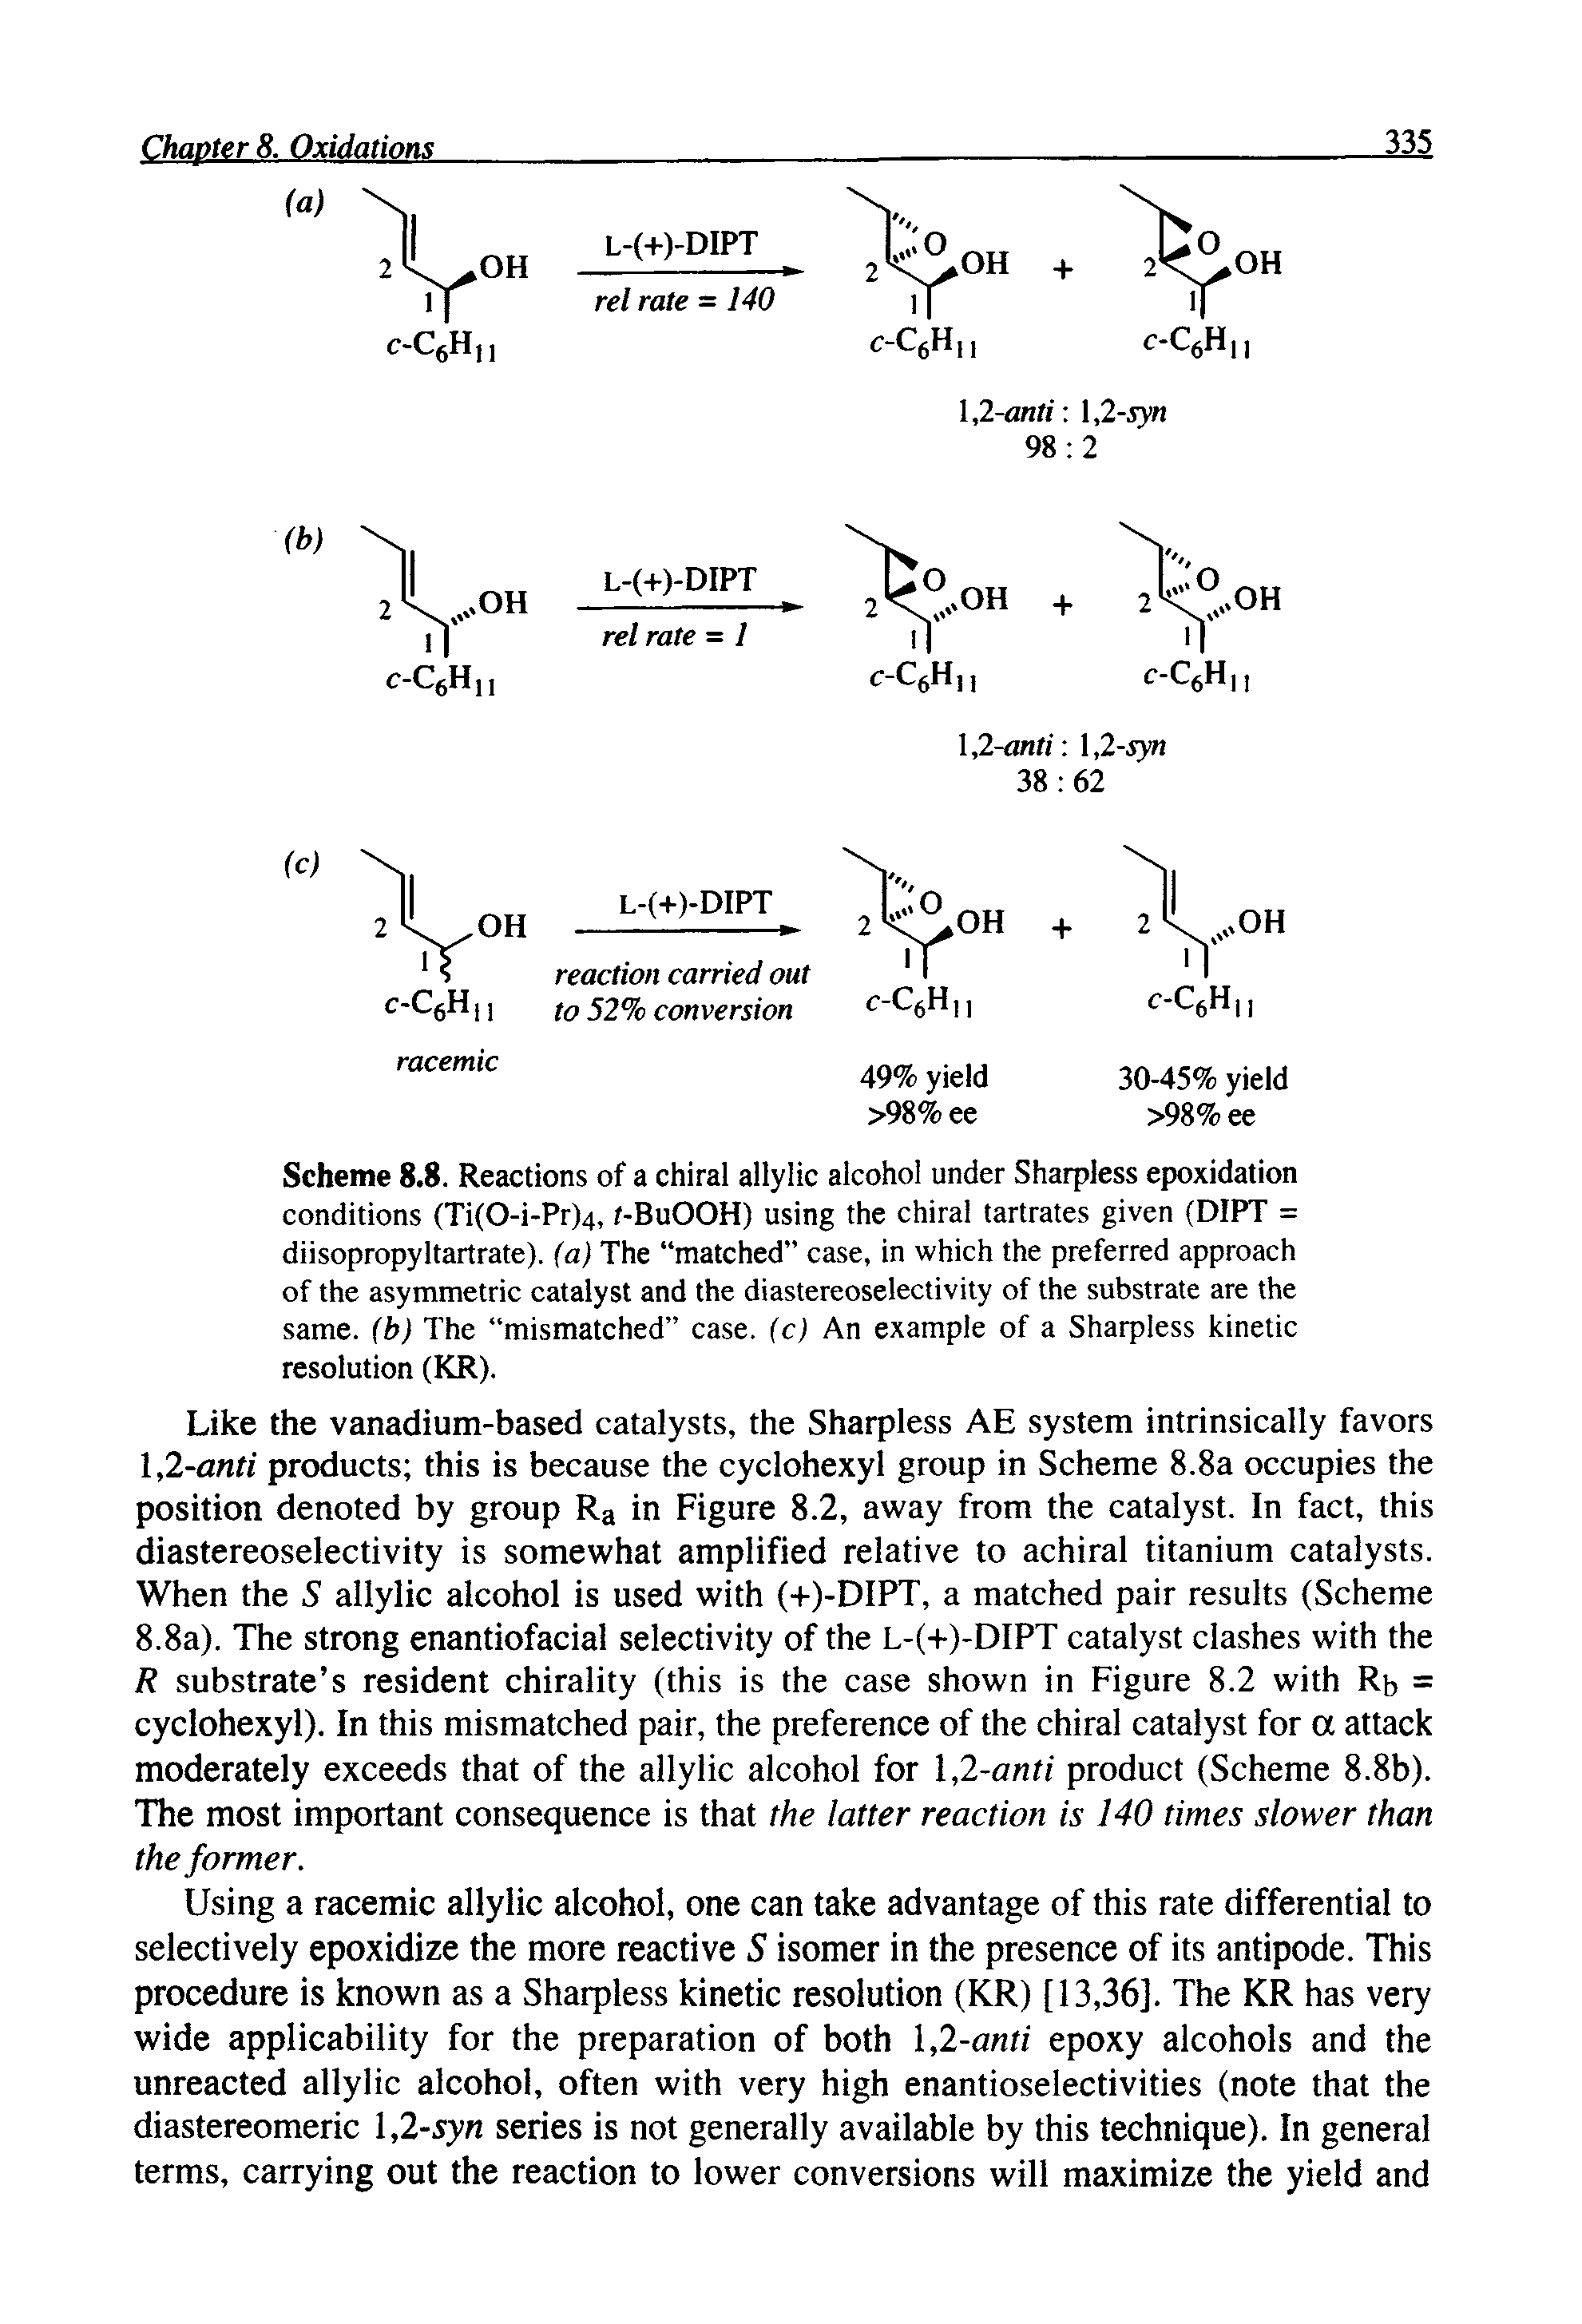 Scheme 8.8. Reactions of a chiral allylic alcohol under Sharpless epoxidation conditions (Ti(0-i-Pr)4, /-BuOOH) using the chiral tartrates given (DIPT = diisopropyltartrate). (a) The matched case, in which the preferred approach of the asymmetric catalyst and the diastereoselectivity of the substrate are the same, (b) The mismatched case, (cj An example of a Sharpless kinetic resolution (KR).